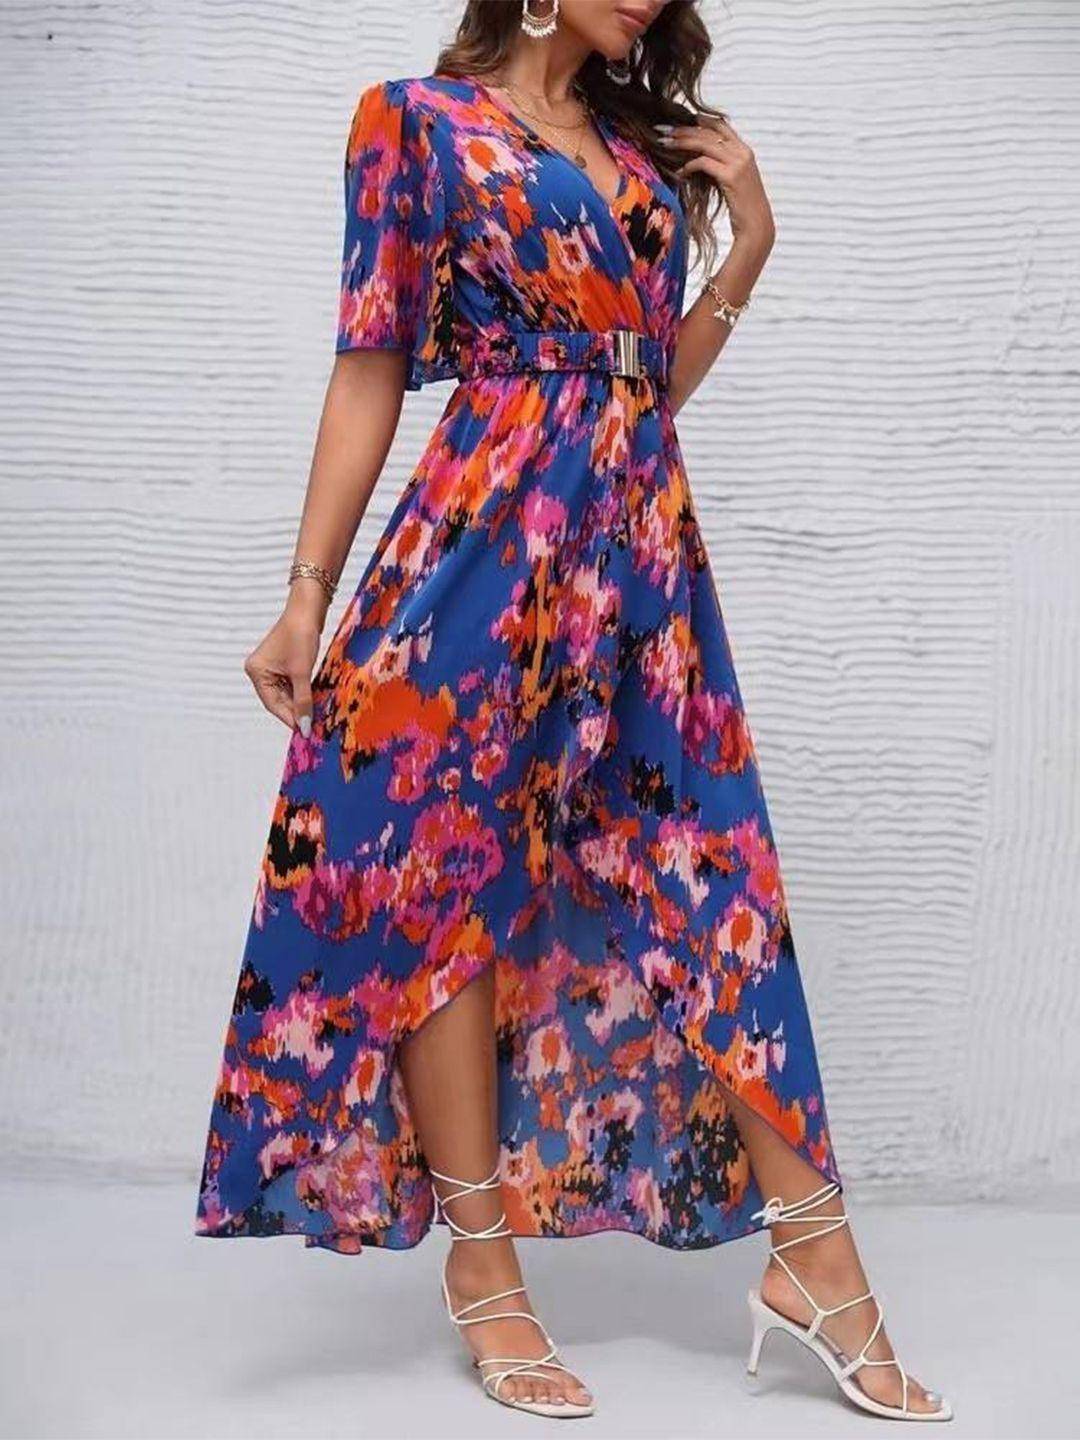 StyleCast Blue & Orange Tie and Dye Printed V-Neck Short Sleeve Casual A-Line Maxi Dress